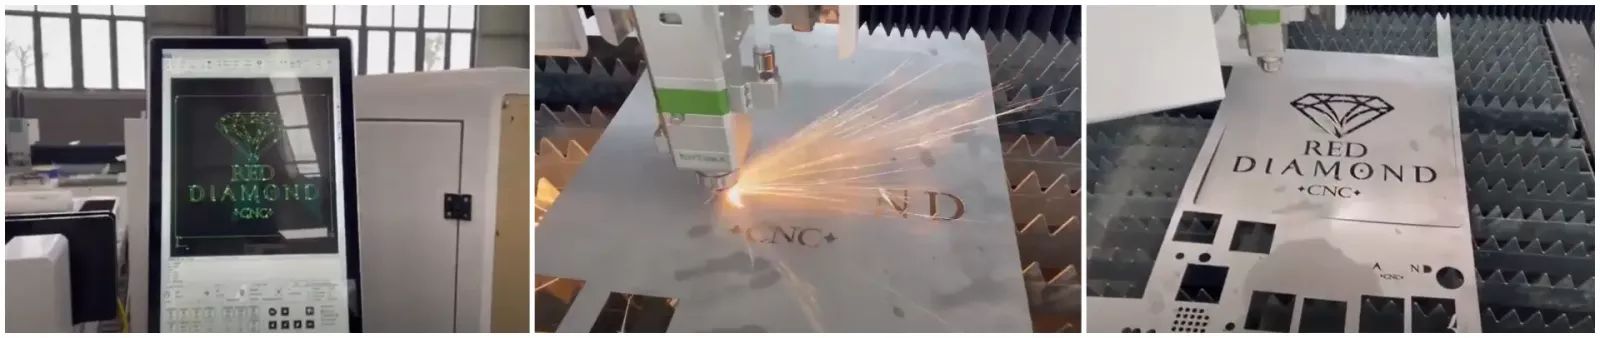 Laser metal cutting machine is creating a new age in industrial 4.0 (6)